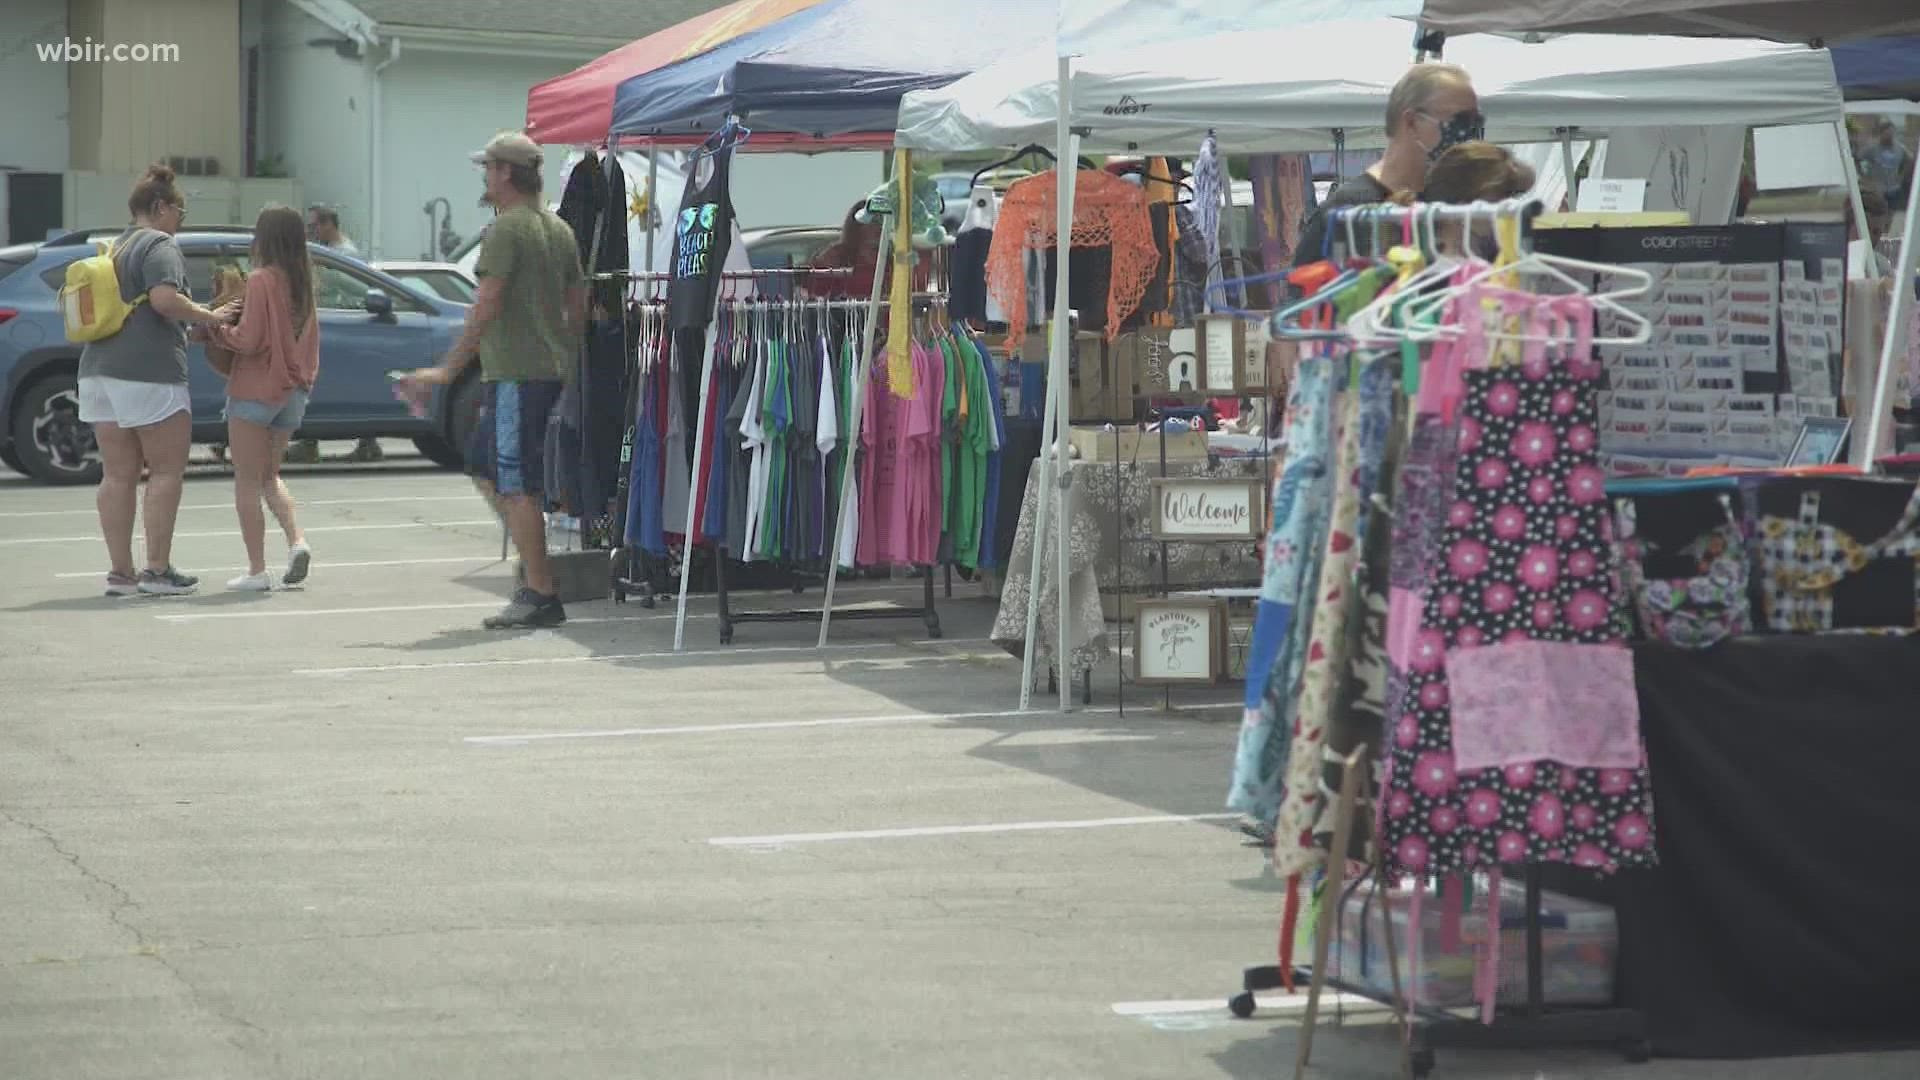 A number of small businesses gathered for the Halls Crossroads Market on Saturday.